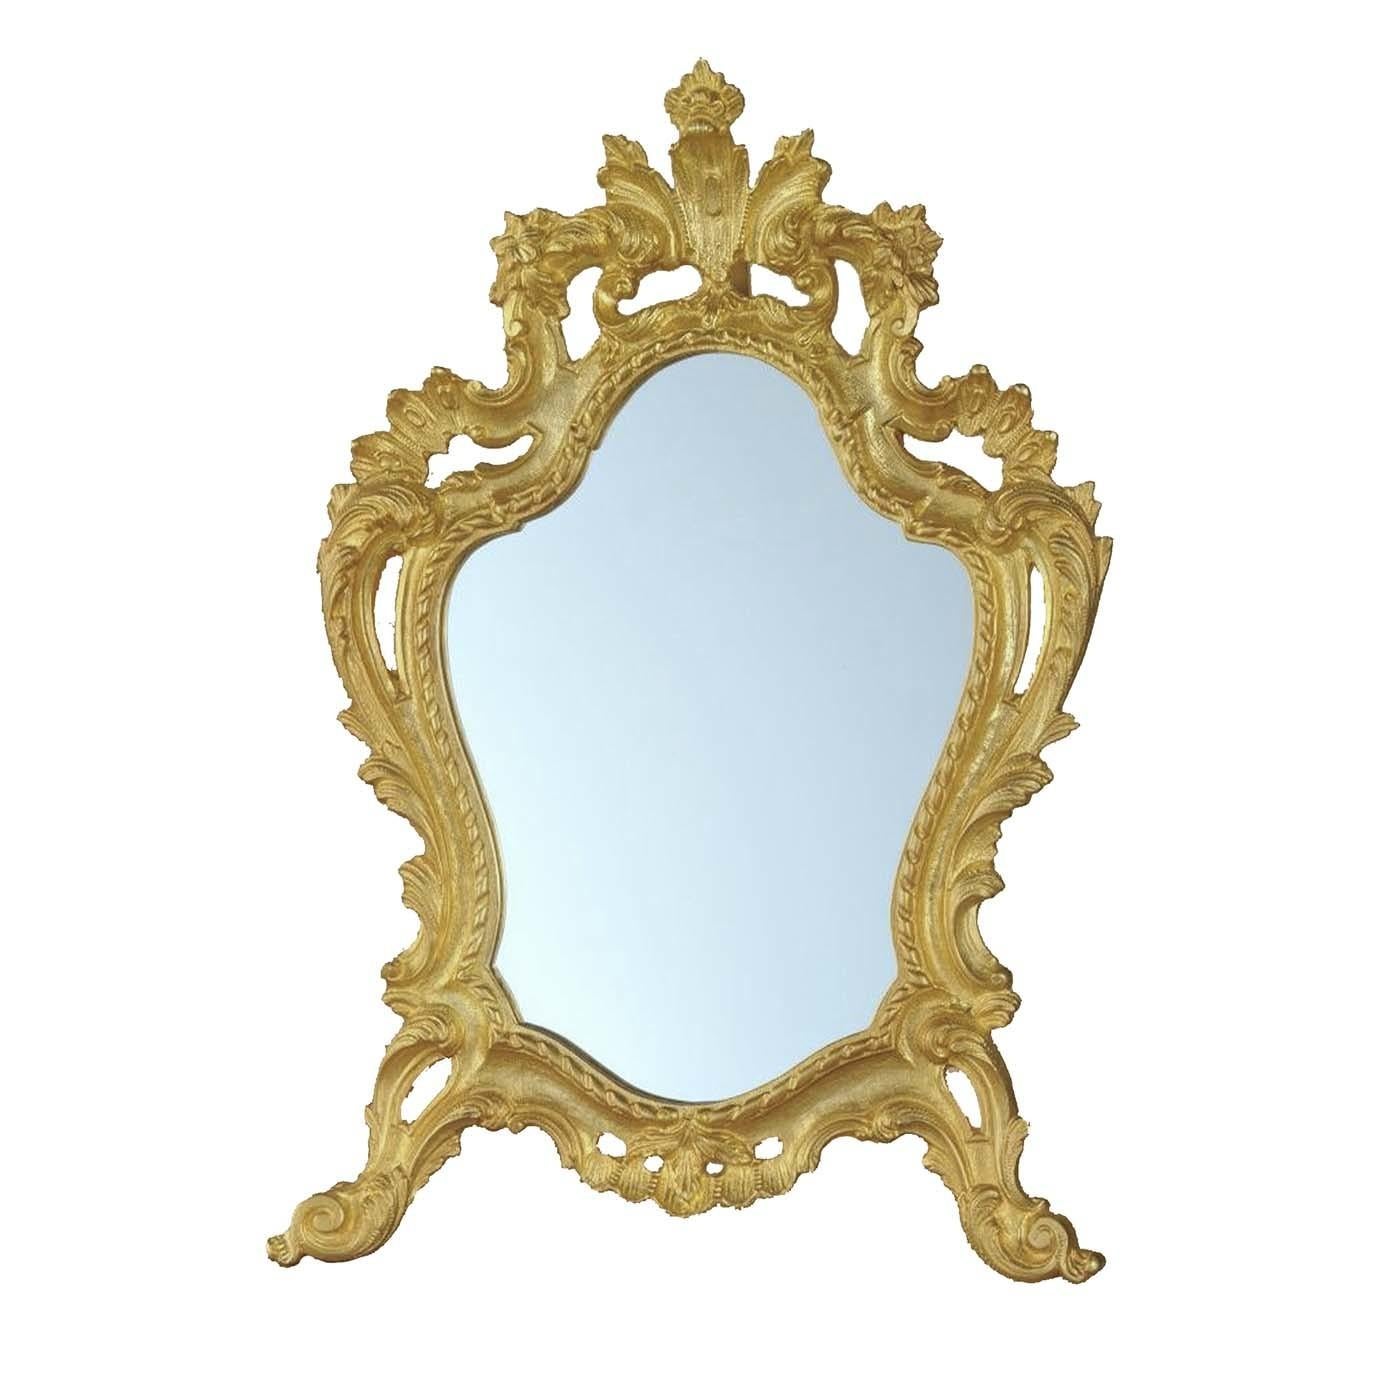 This superb mirror will enrich any decor and is particularly suitable for a traditional interior, either in an entryway as lavish welcoming piece, or to adorn a mantelpiece. Its bronze frame is finished in satin gold and features two feet supporting